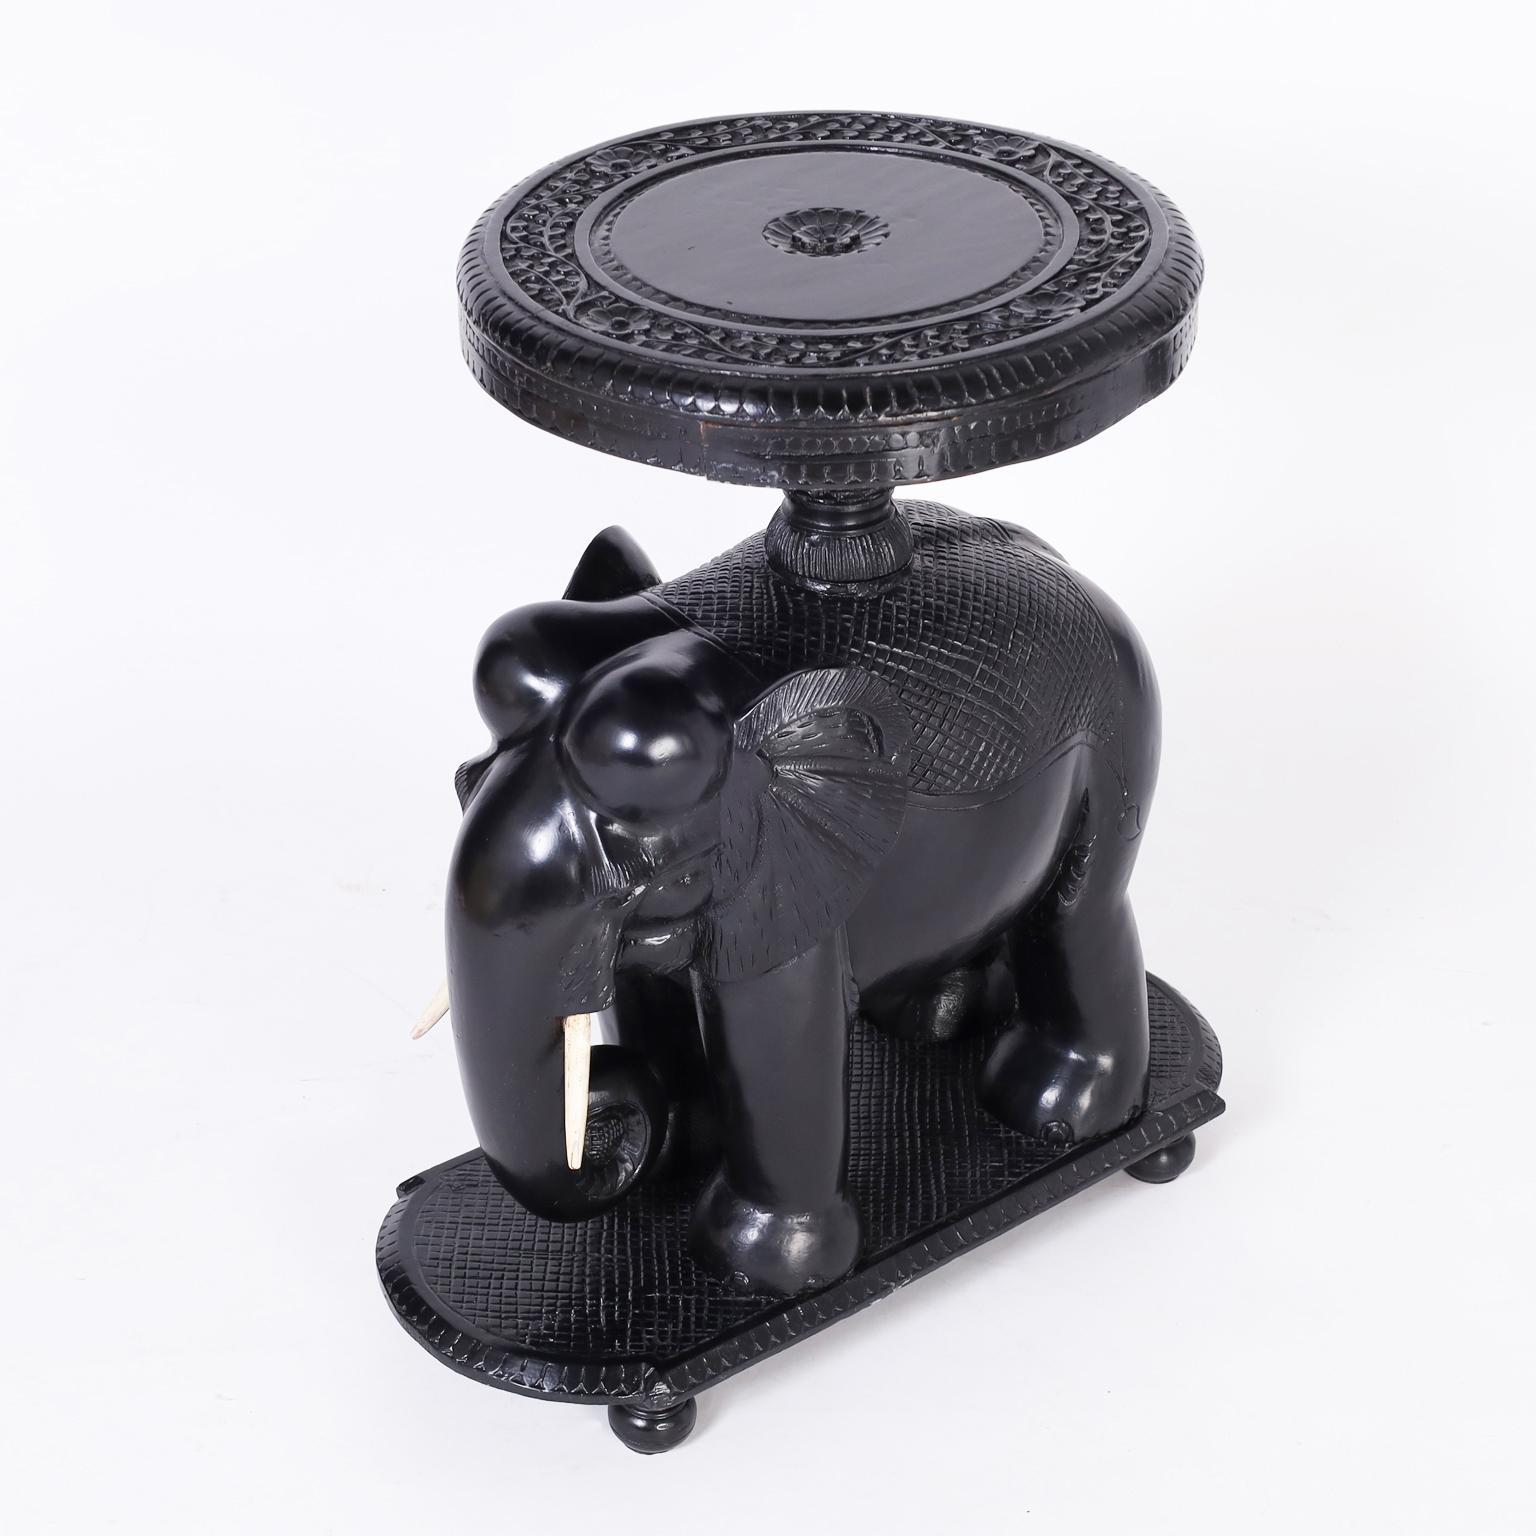 Anglo Indian stand or table crafted in indigenous hardwood having an ebonized finish with a round top carved with floral designs on a carved elephant base with bone tusks on a platform with turned feet.